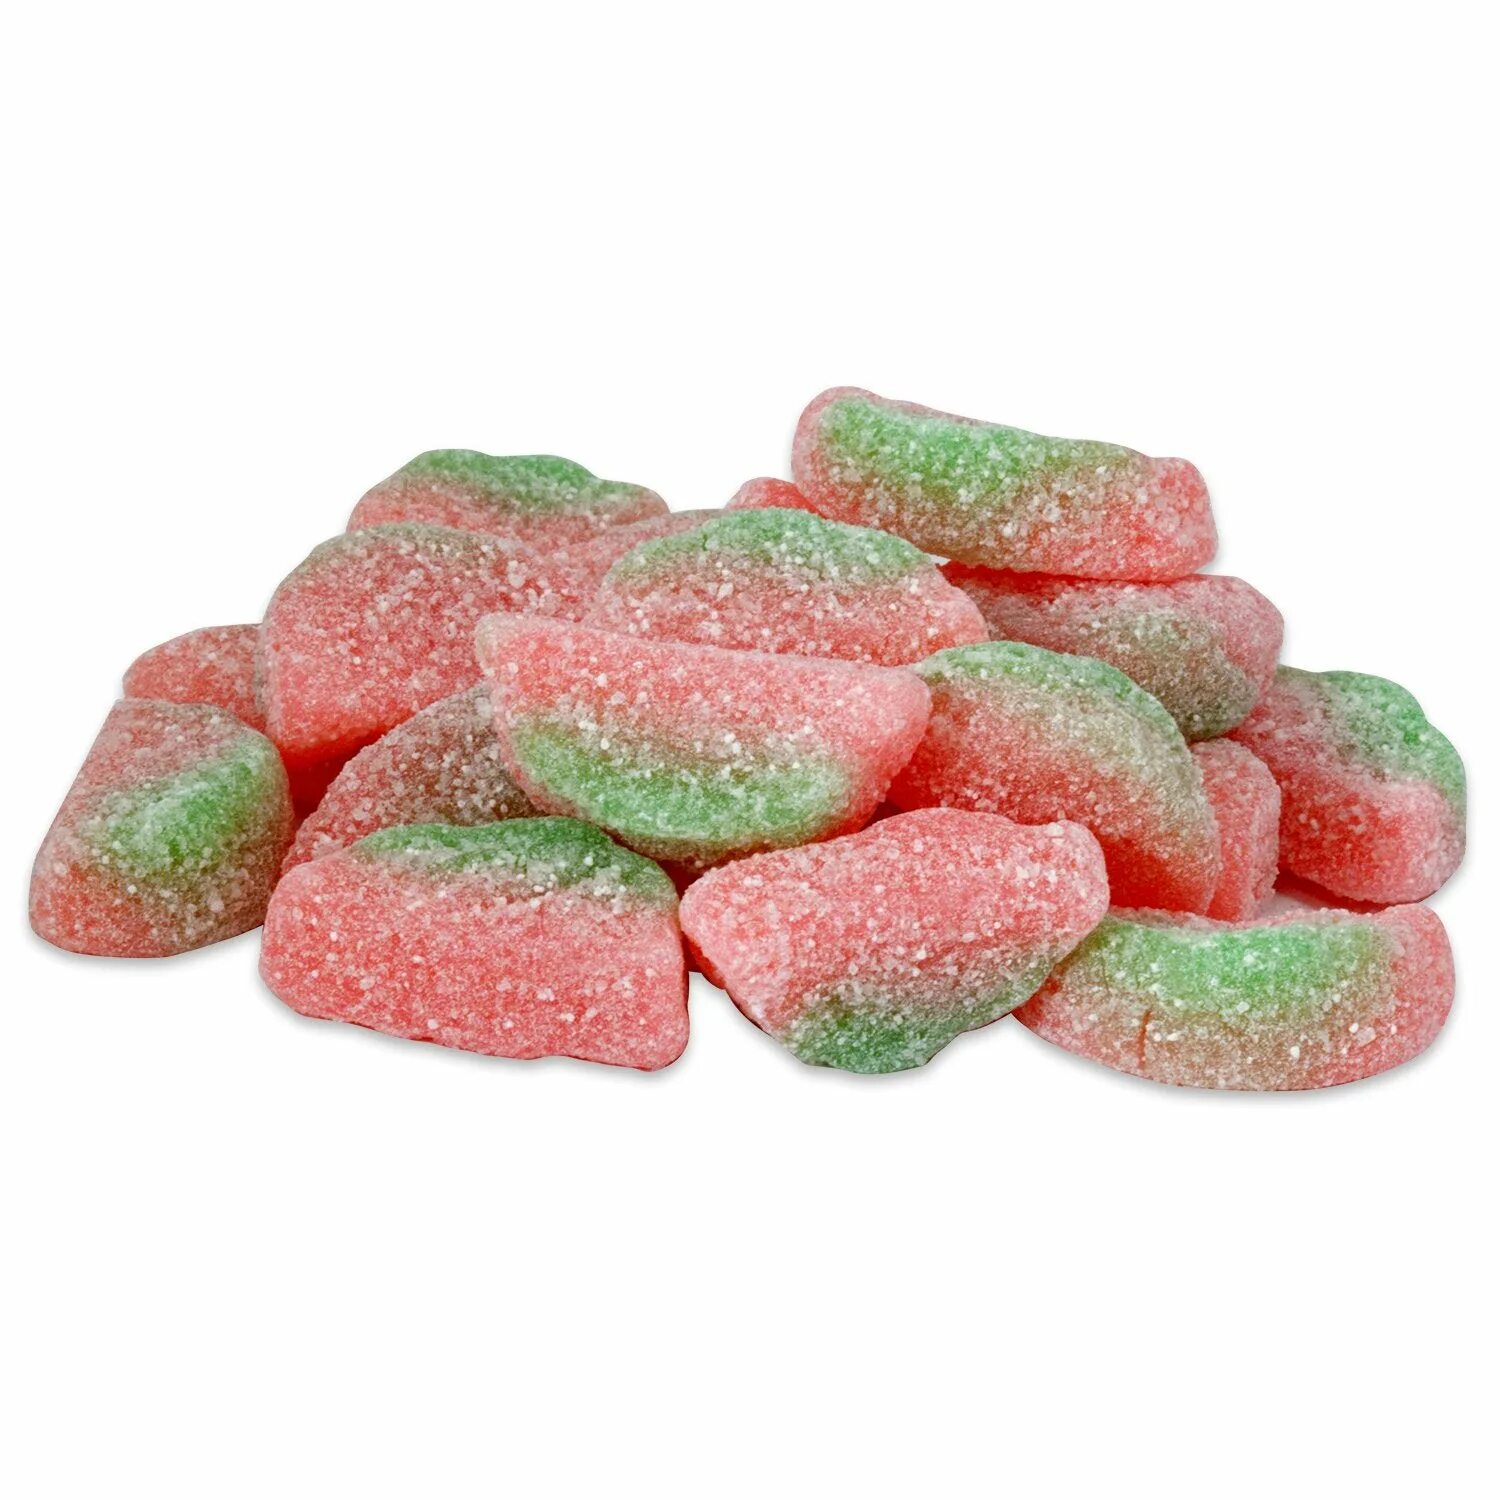 Jelly candy. Sour Patch мармелад. Jelly Candy тянучка. Jammy Jelly Candy's.